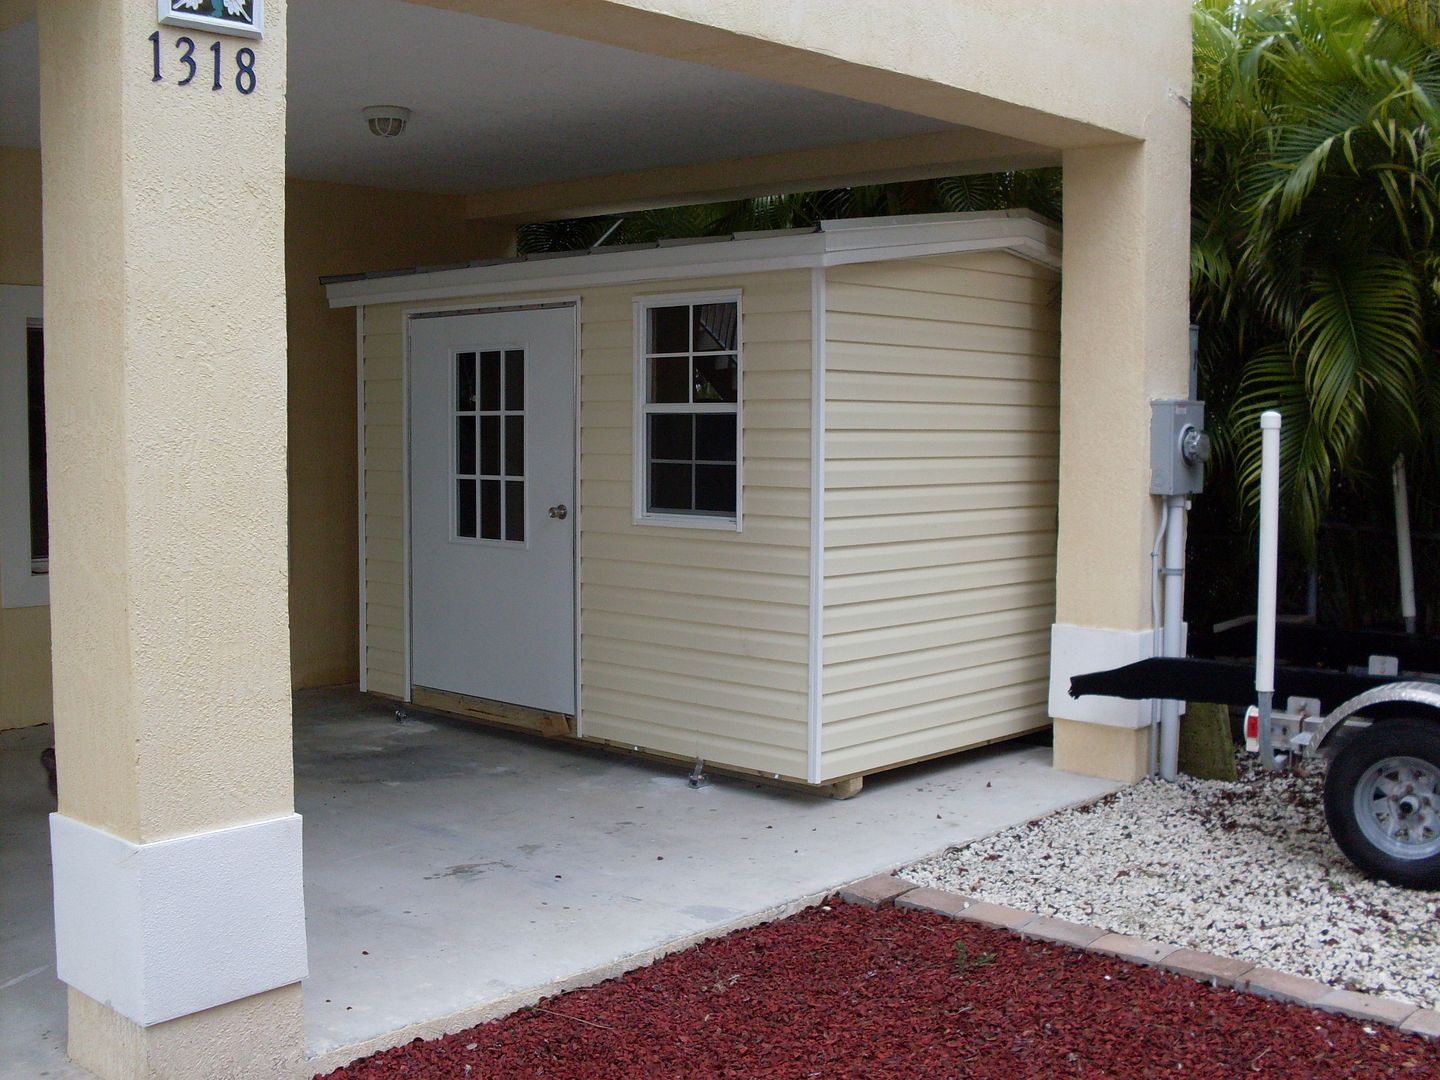 Miami Dade County Storage sheds for sale sale - County legal sheds